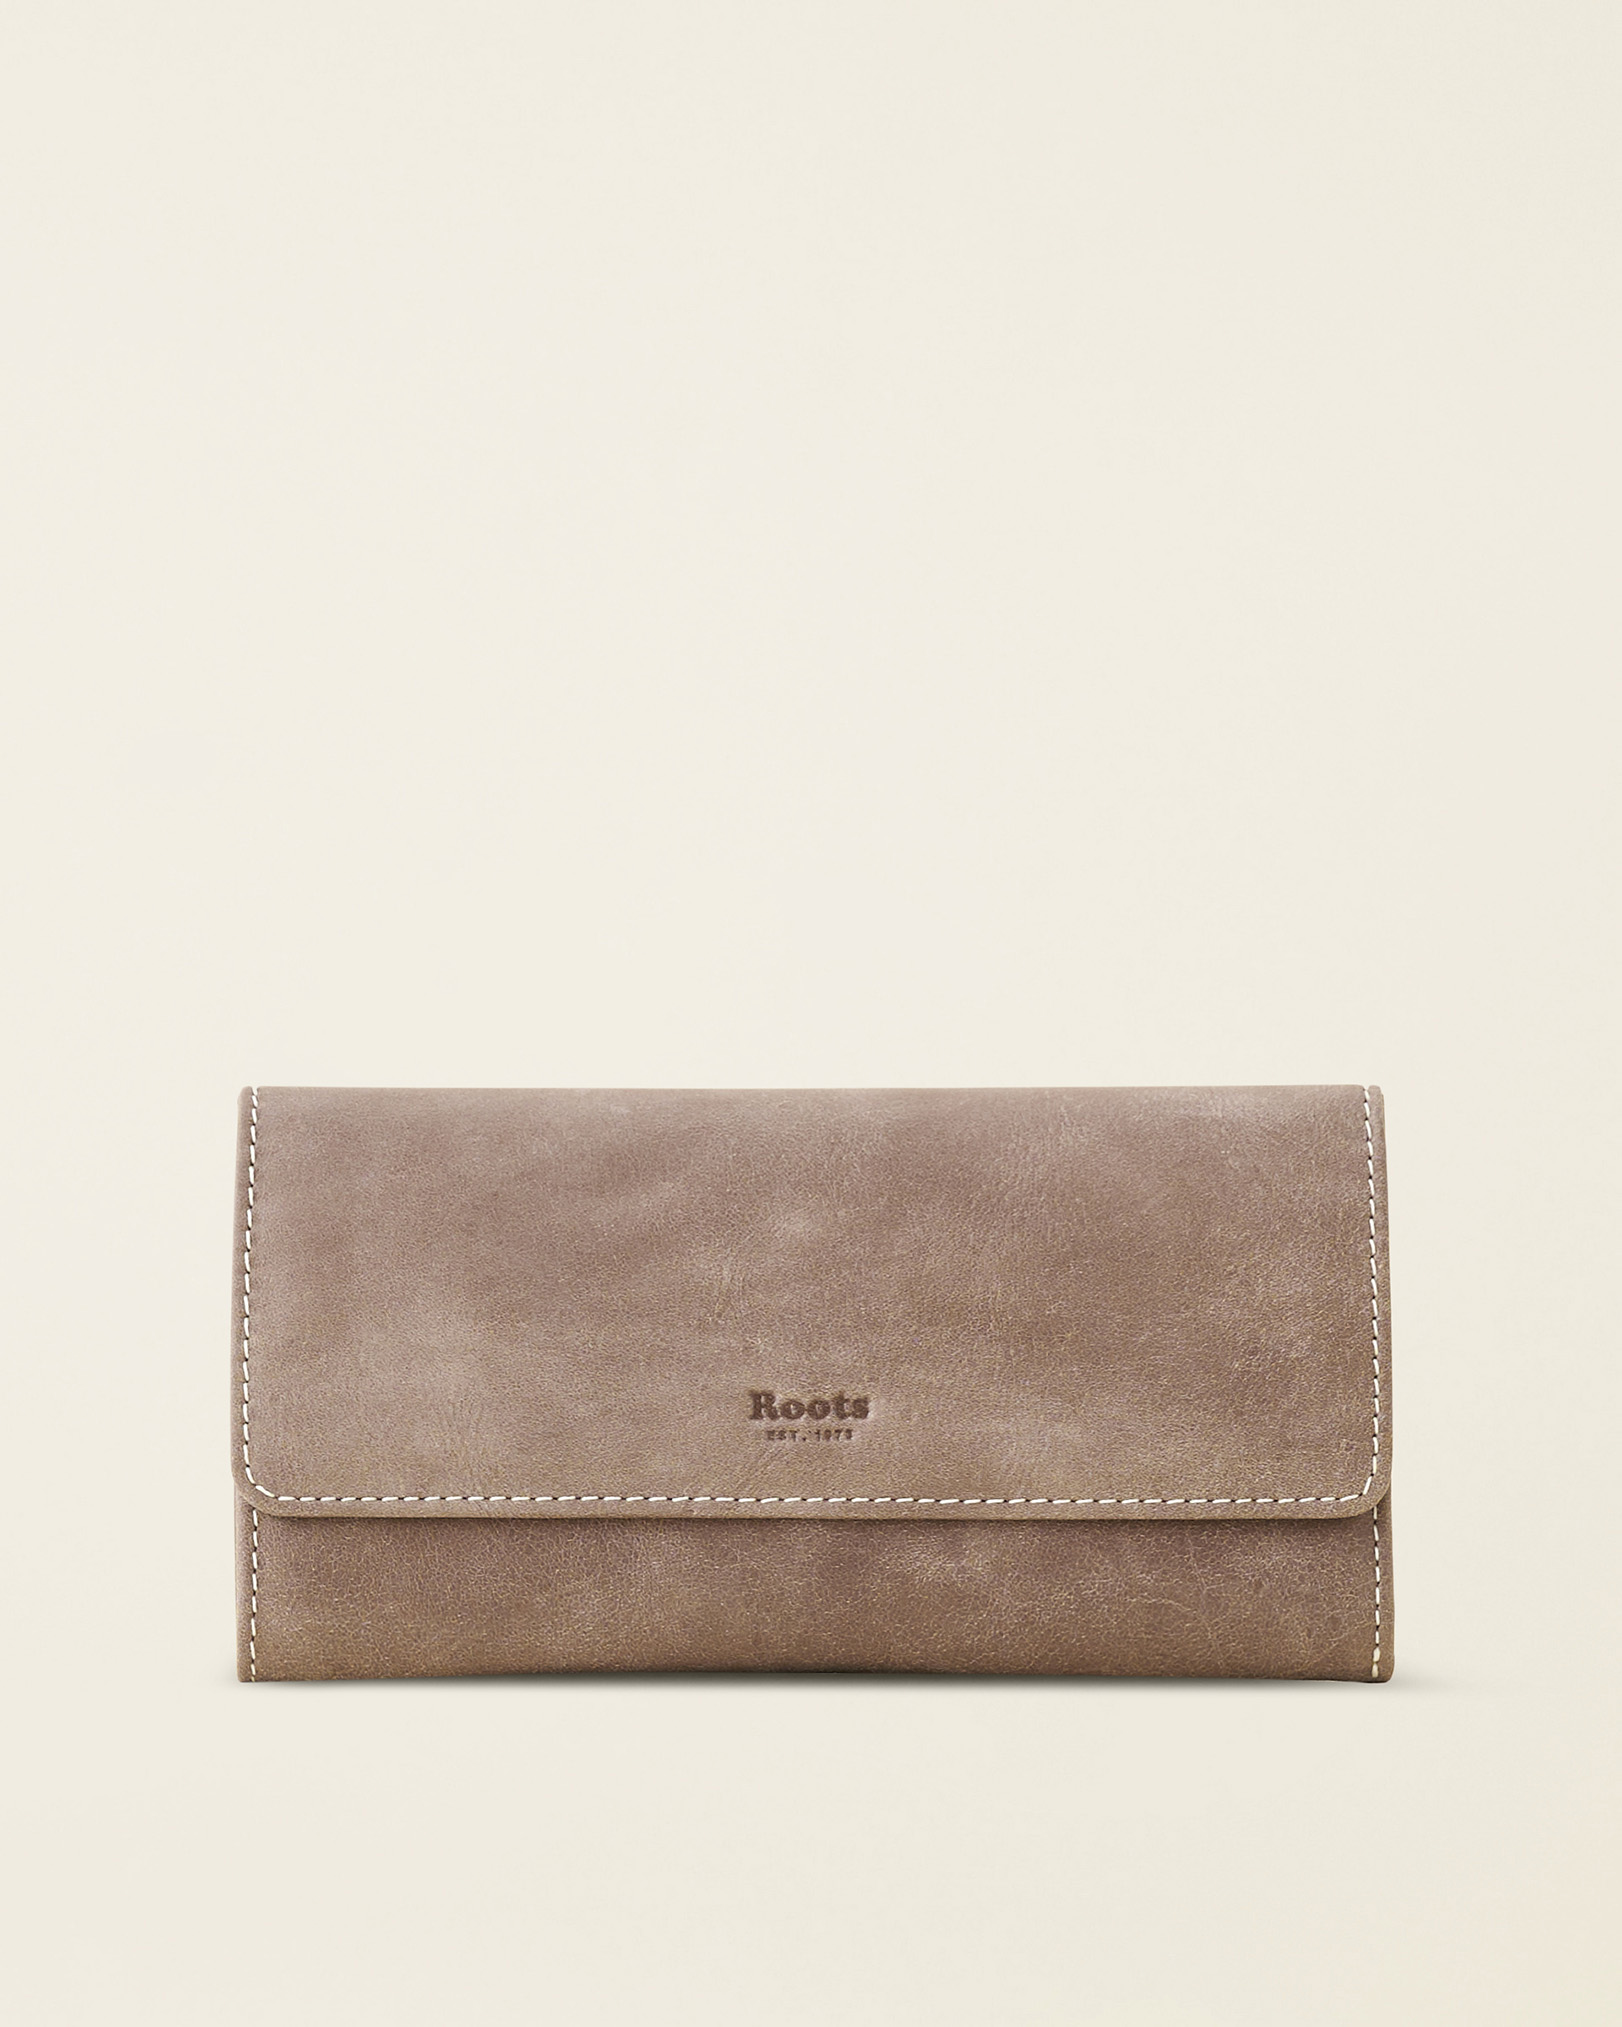 Roots Trifold Clutch Tribe in Fawn